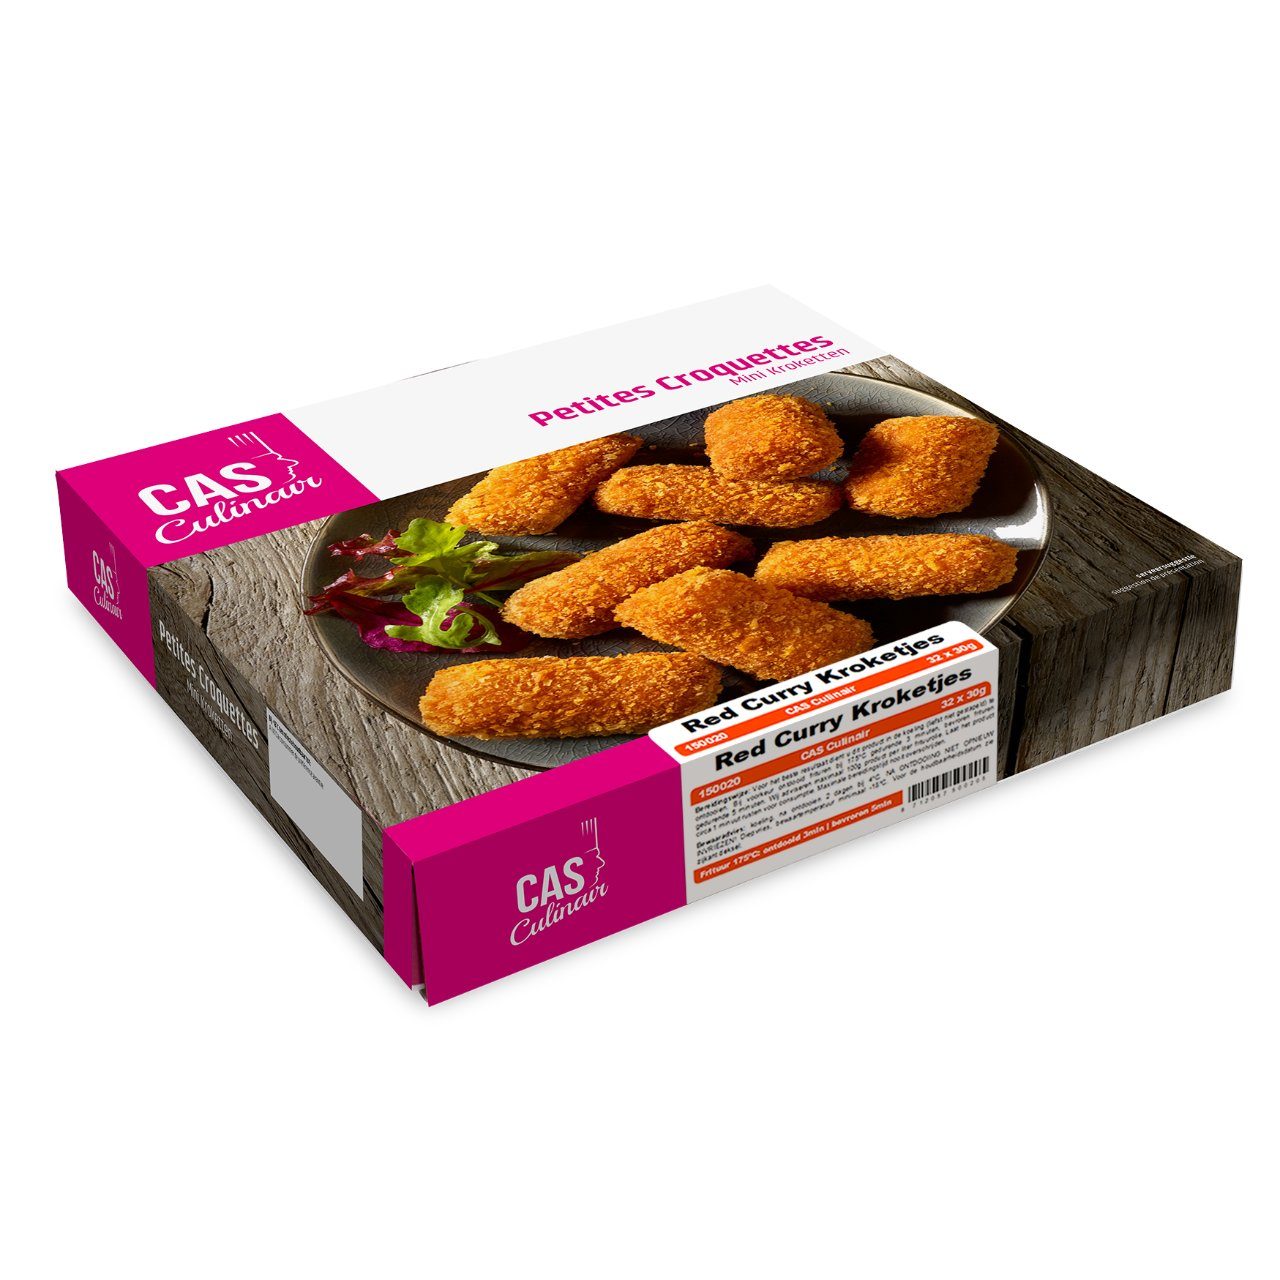 Petites croquettes red curry